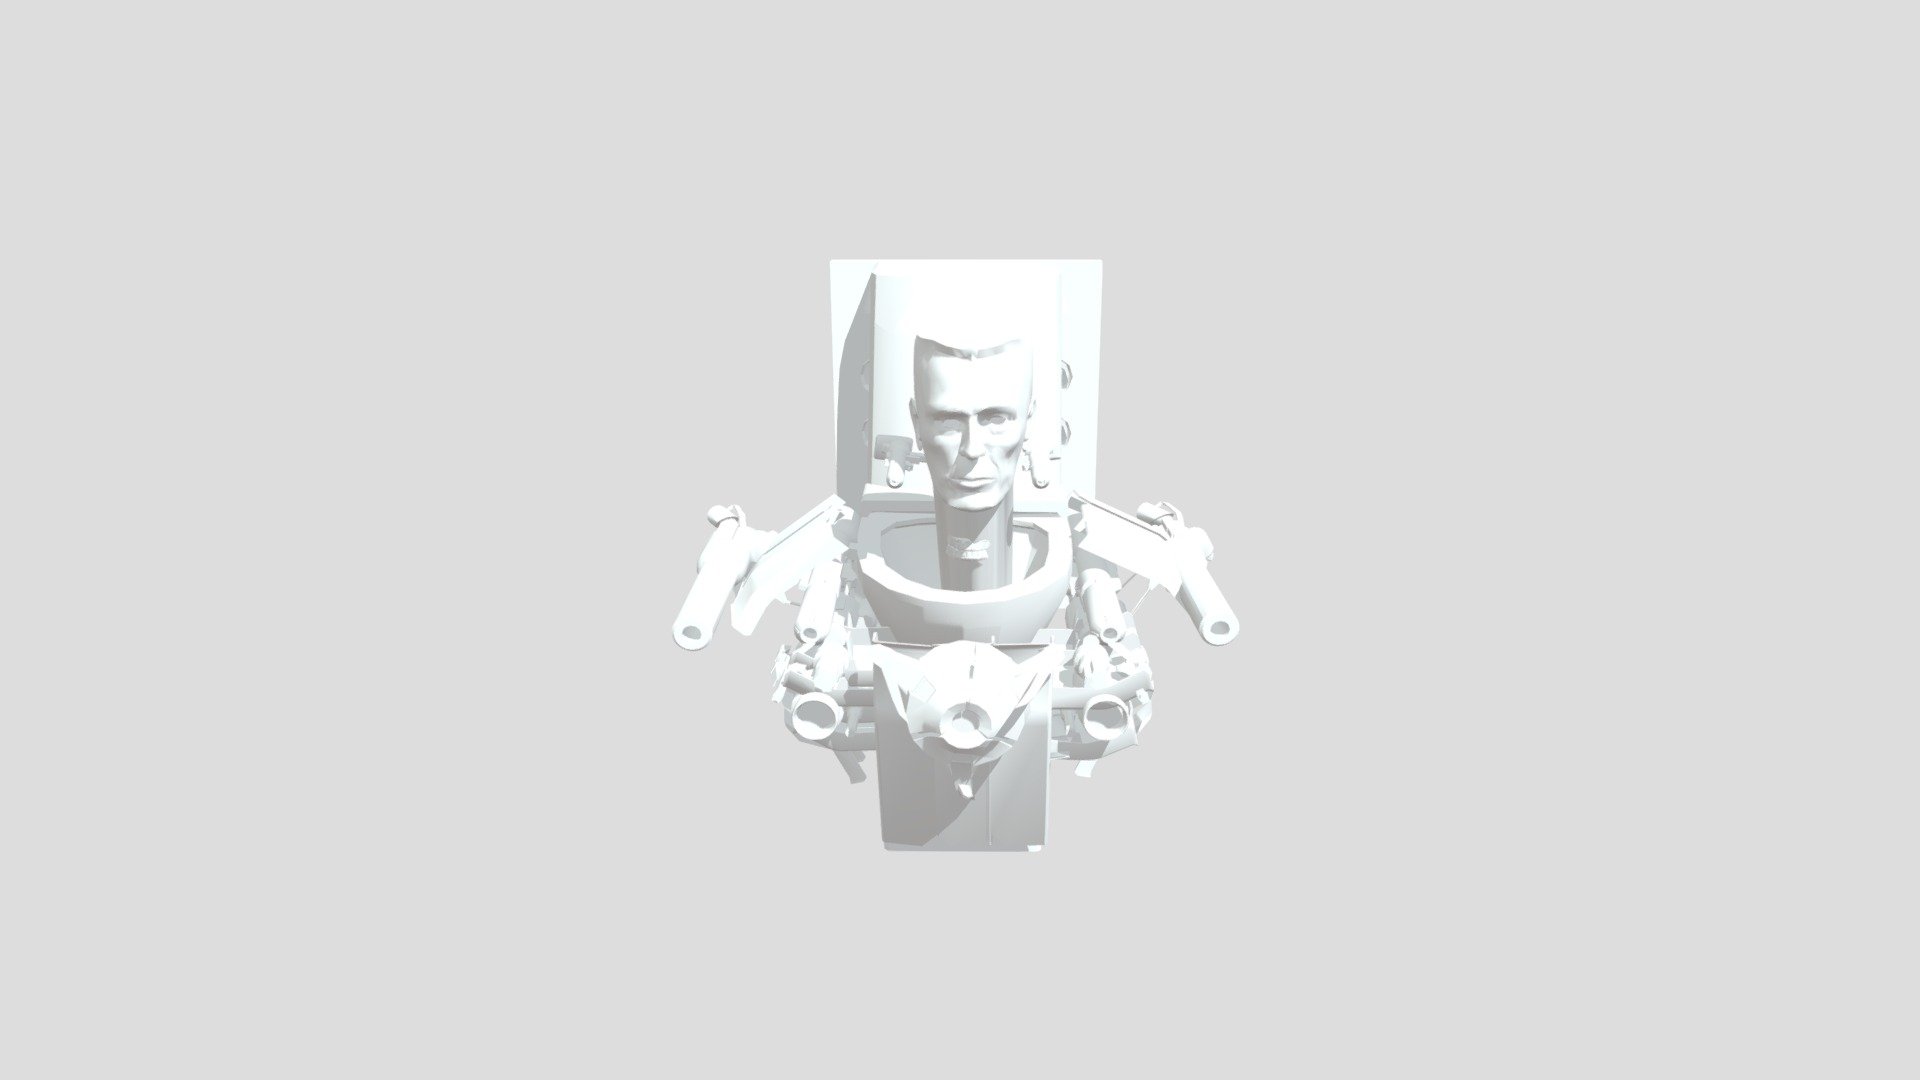 Gman 4,0 - 3D model by Tryhard (@SunsetChill) [8efab5c]